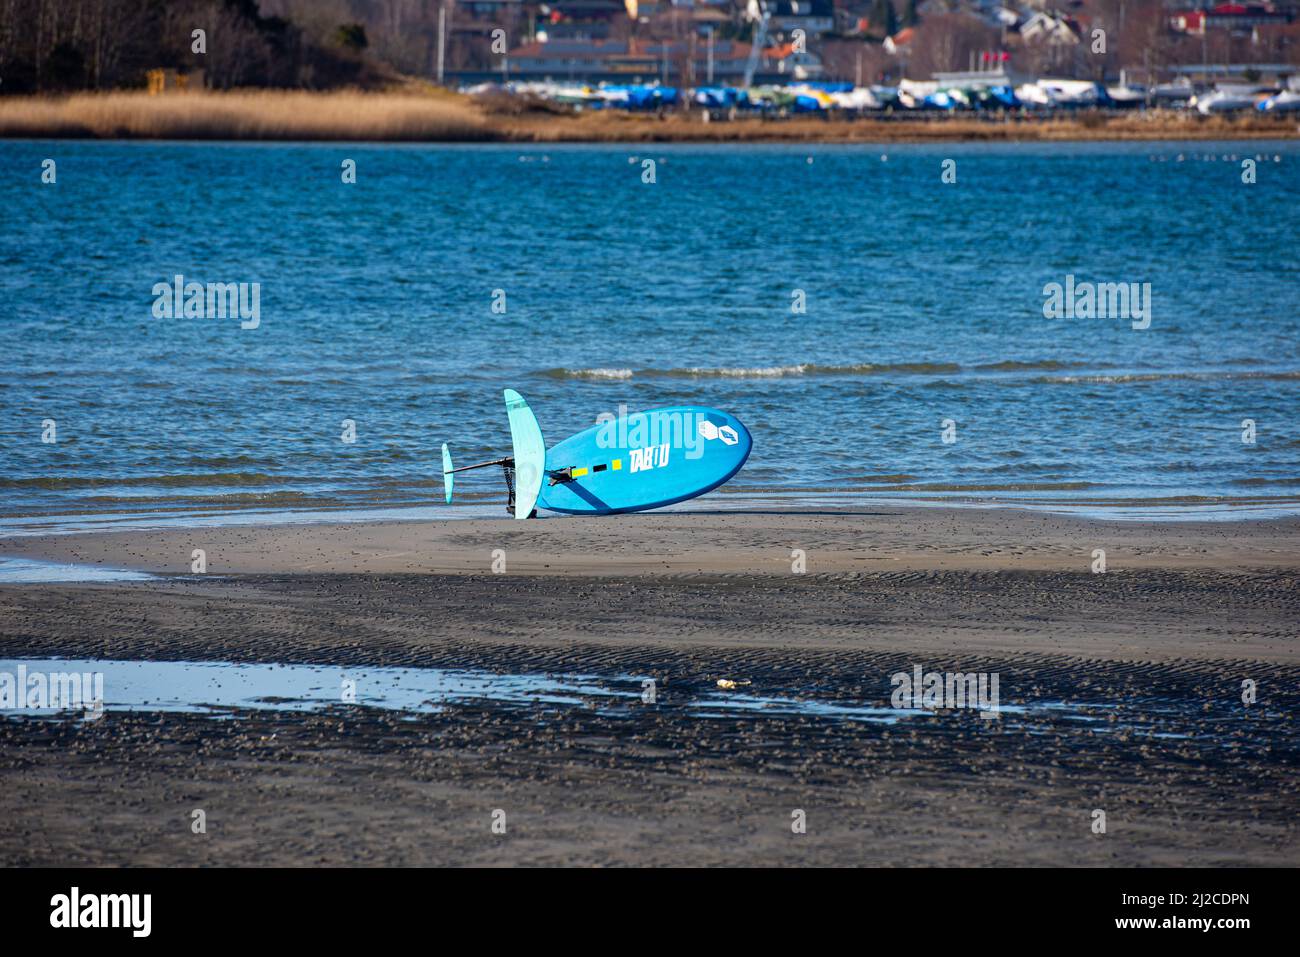 Gothenburg, Sweden - March 13 2022: Blue Tabou foiling board on a beach Stock Photo